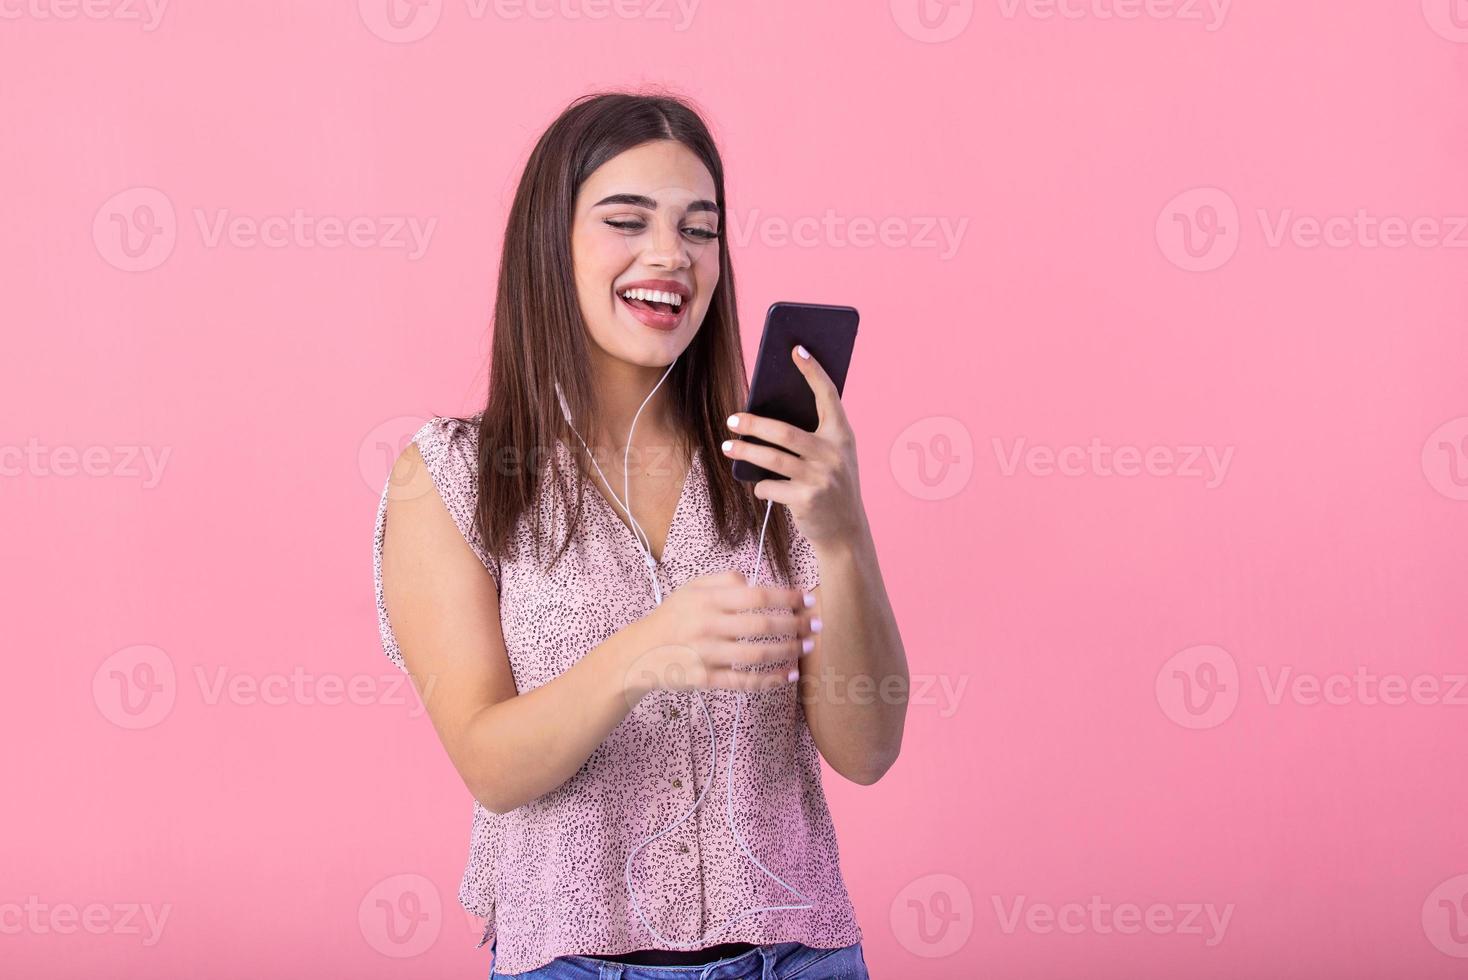 Excited beautiful girl hold mobile phone with headphones listening to music on blank empty screen isolated on pink studio background . Emotions, lifestyle concept. Copy space. photo